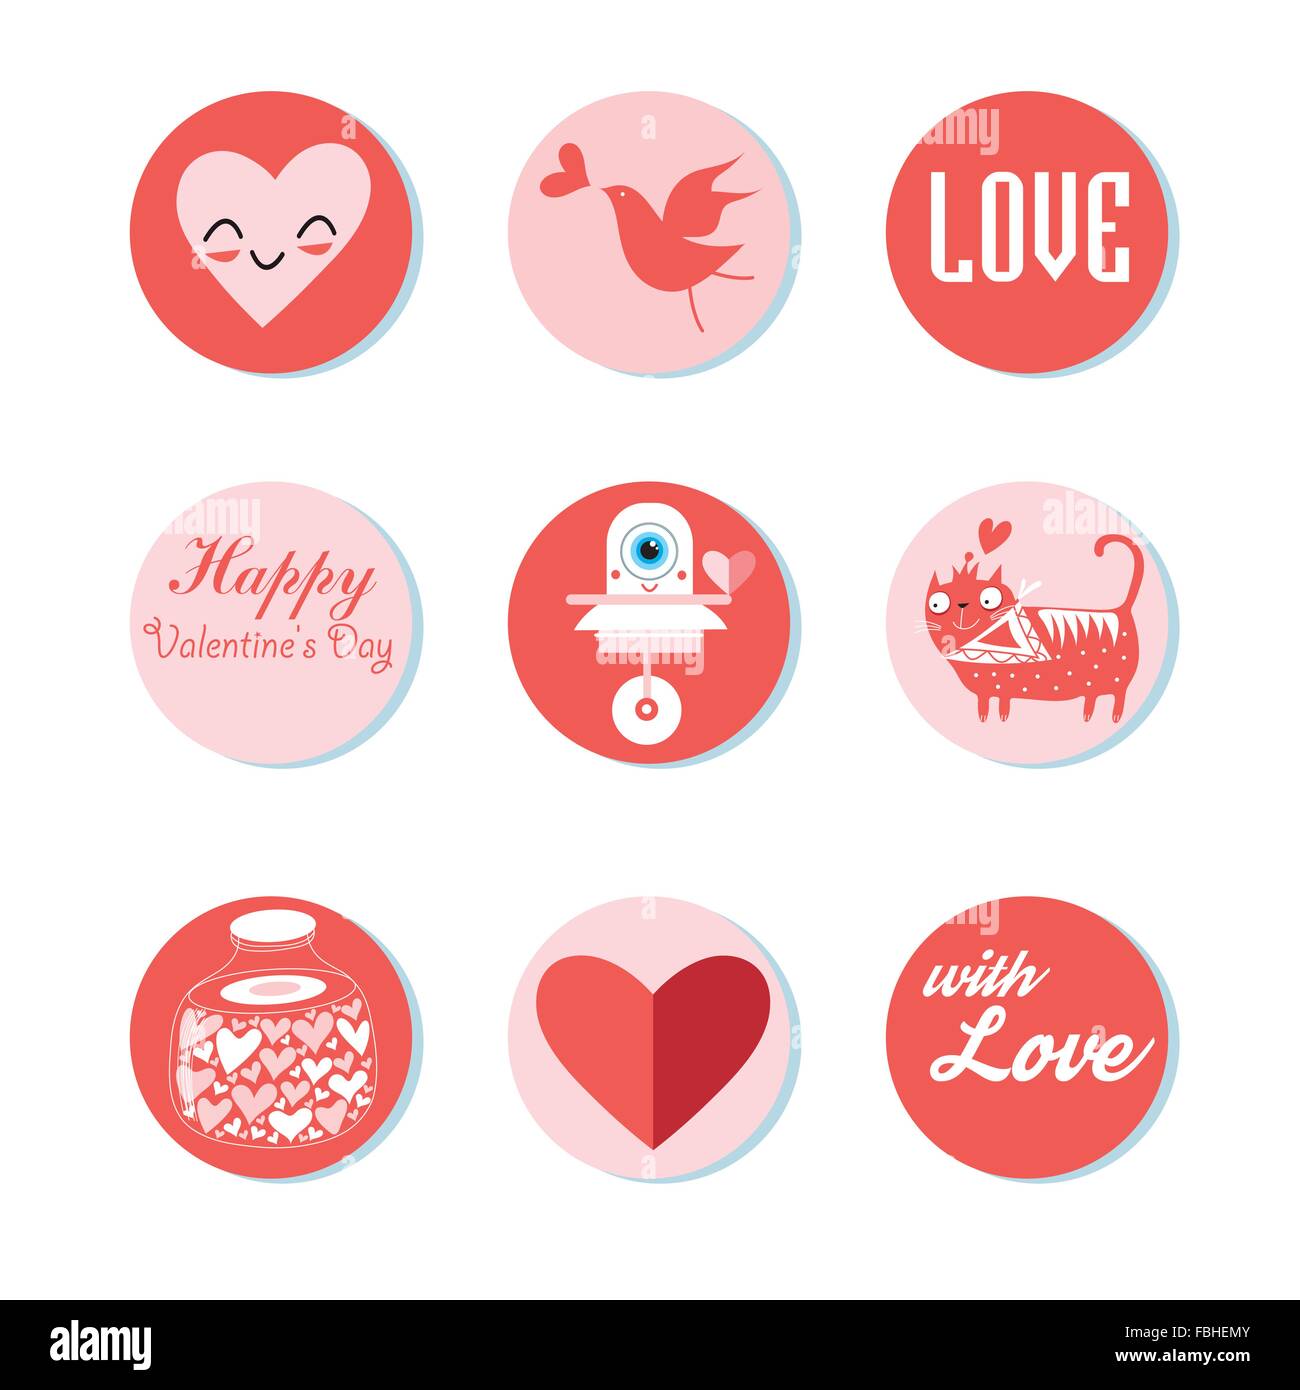 Love is a collection of 9 cards. Perfect for Valentines Day stickers. Stock Vector